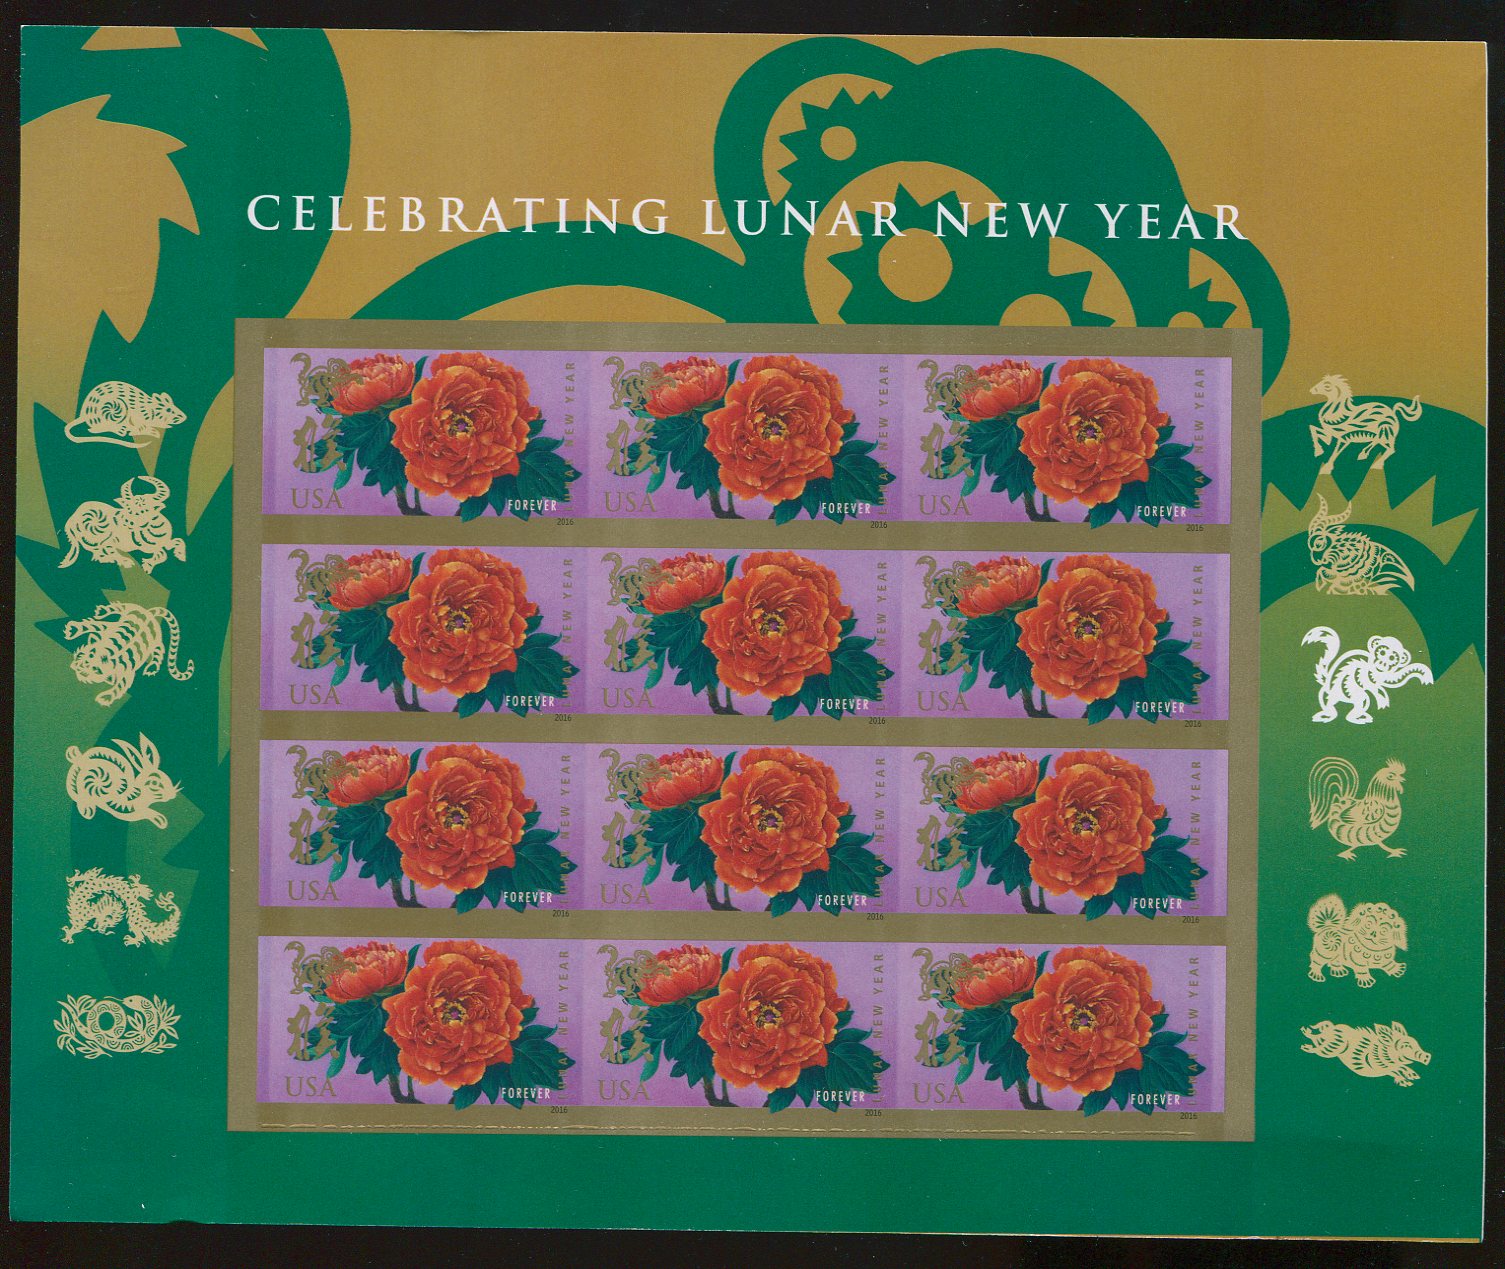 5057i Forever Lunar New Year Imperf Sheet of 12 #5057ish